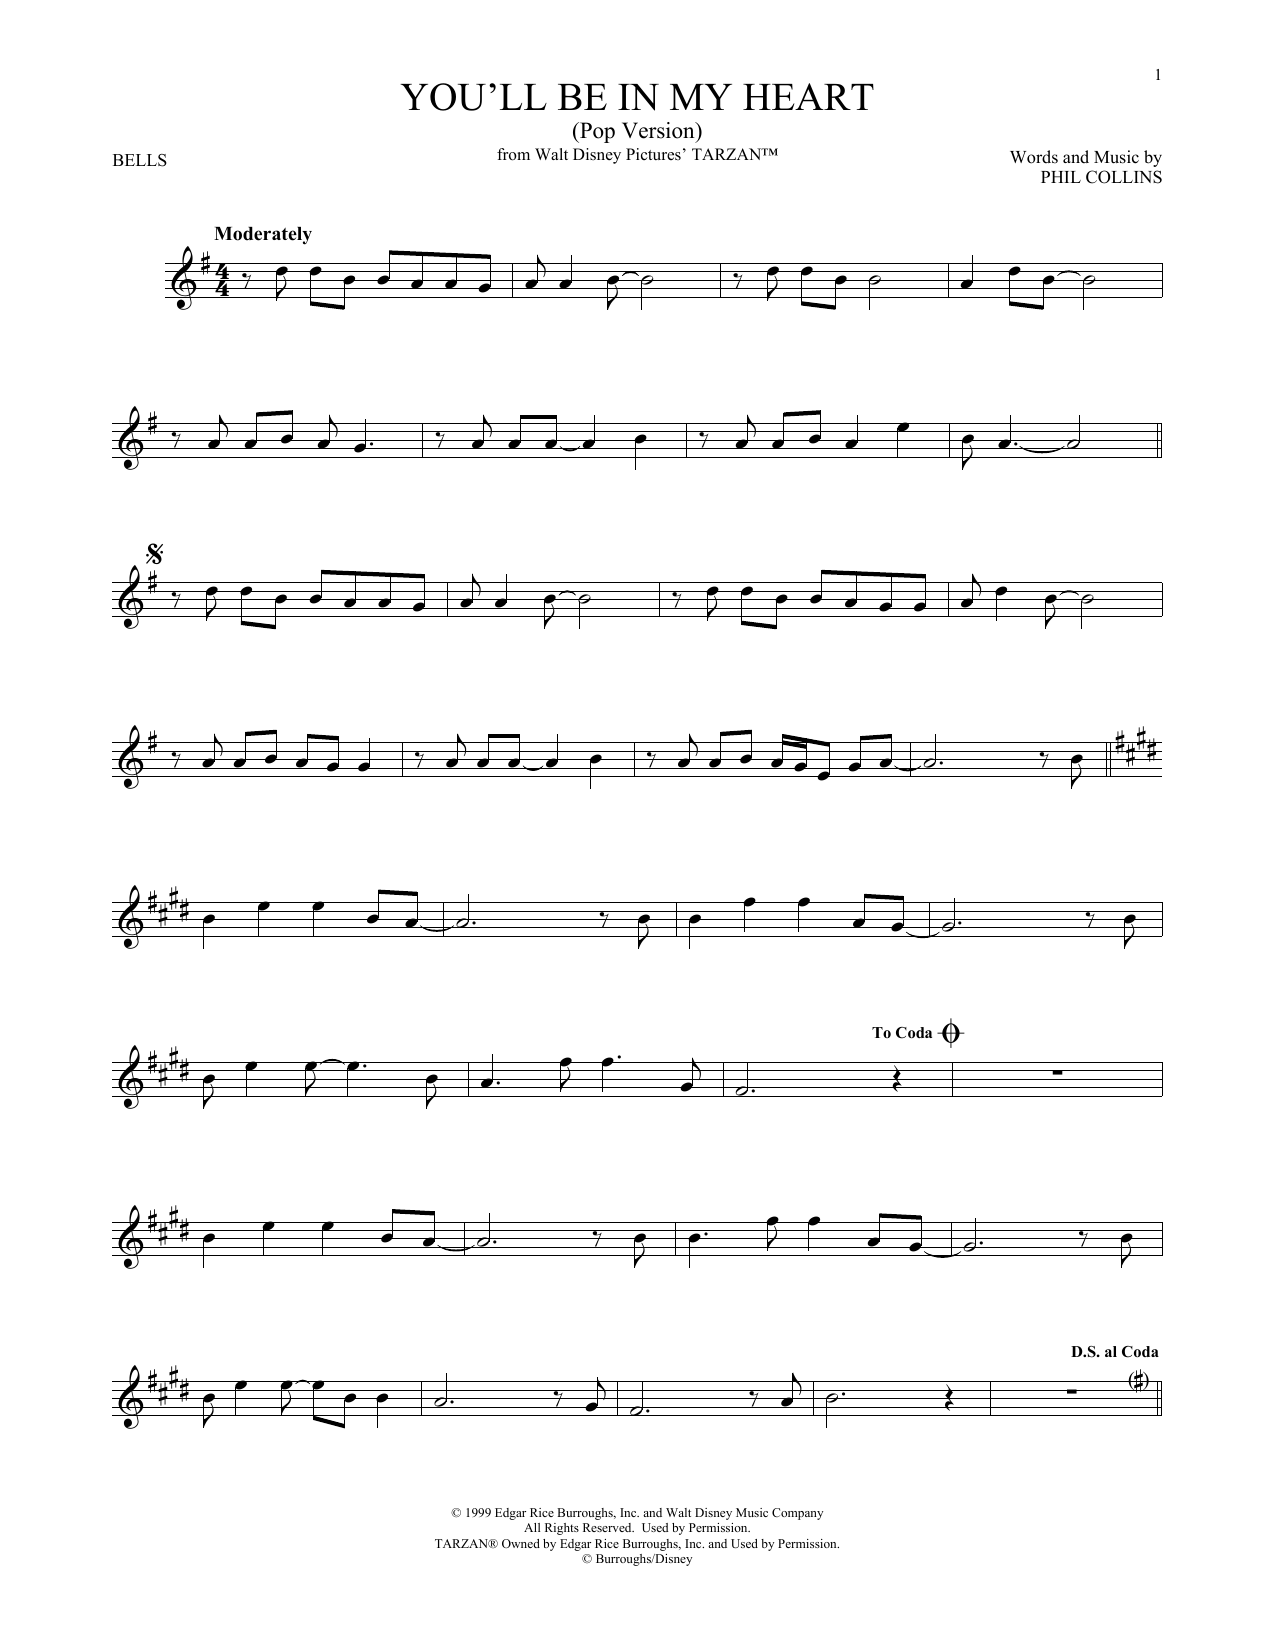 Download Phil Collins You'll Be In My Heart (from Tarzan) Sheet Music